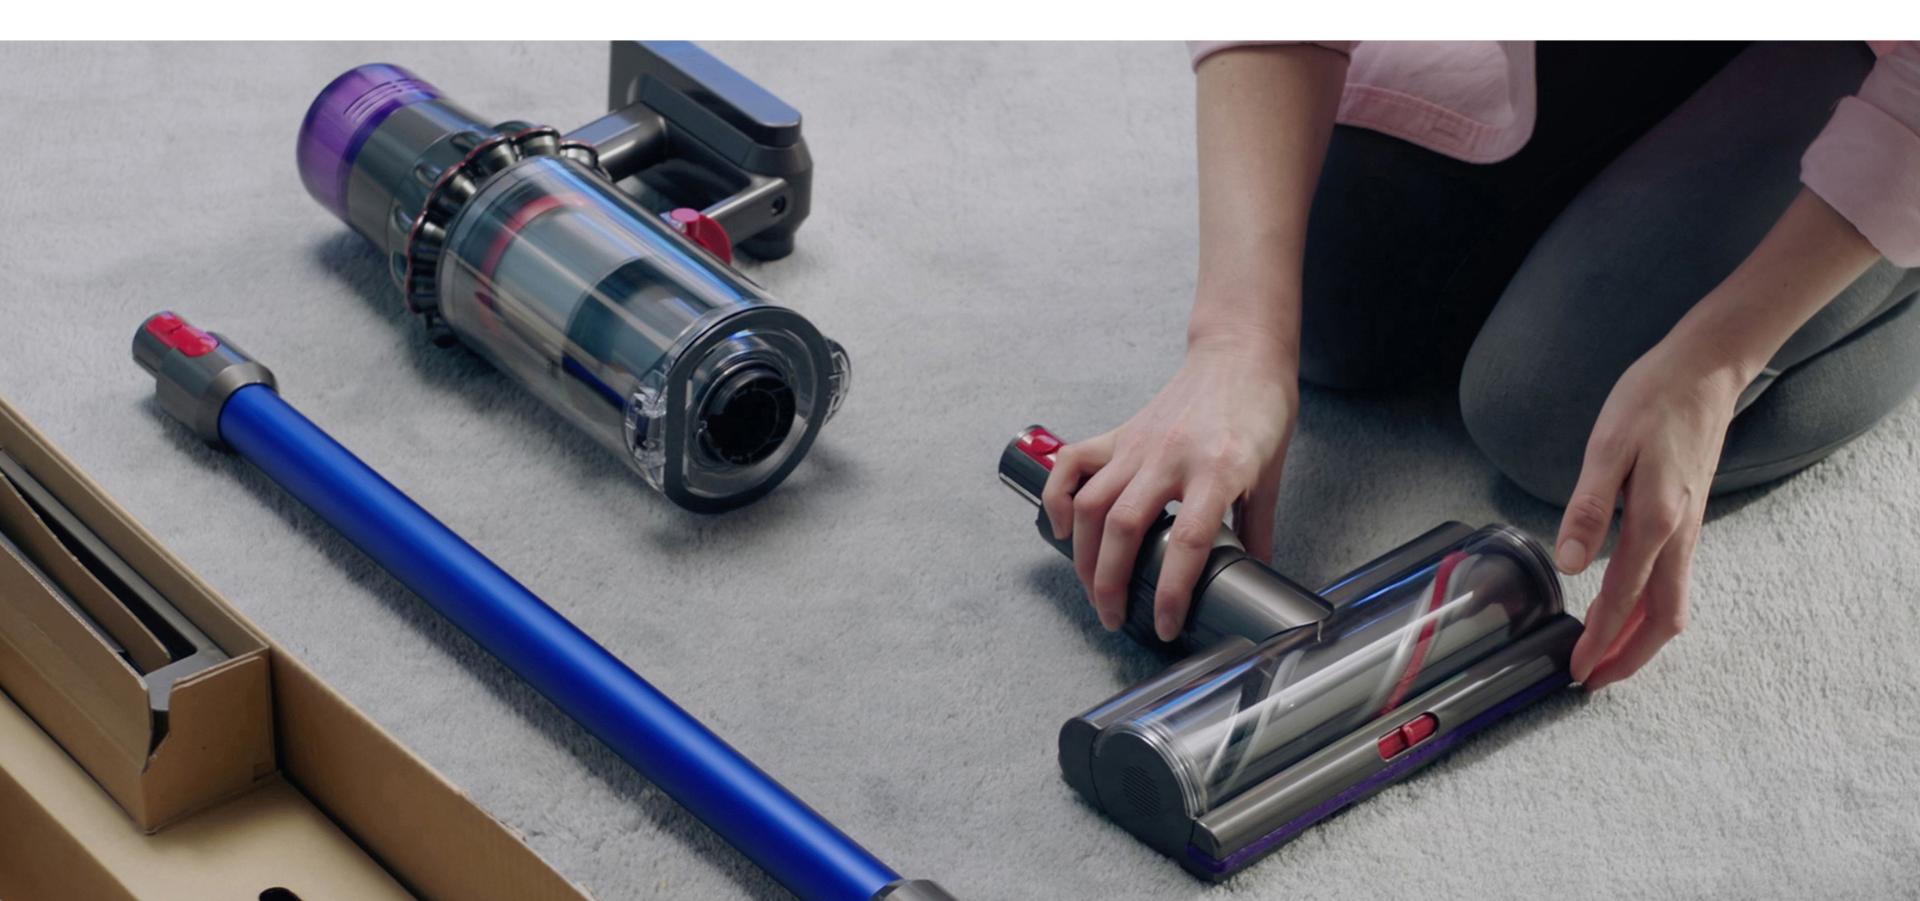 Dyson V11 vacuum being assembed on the floor.